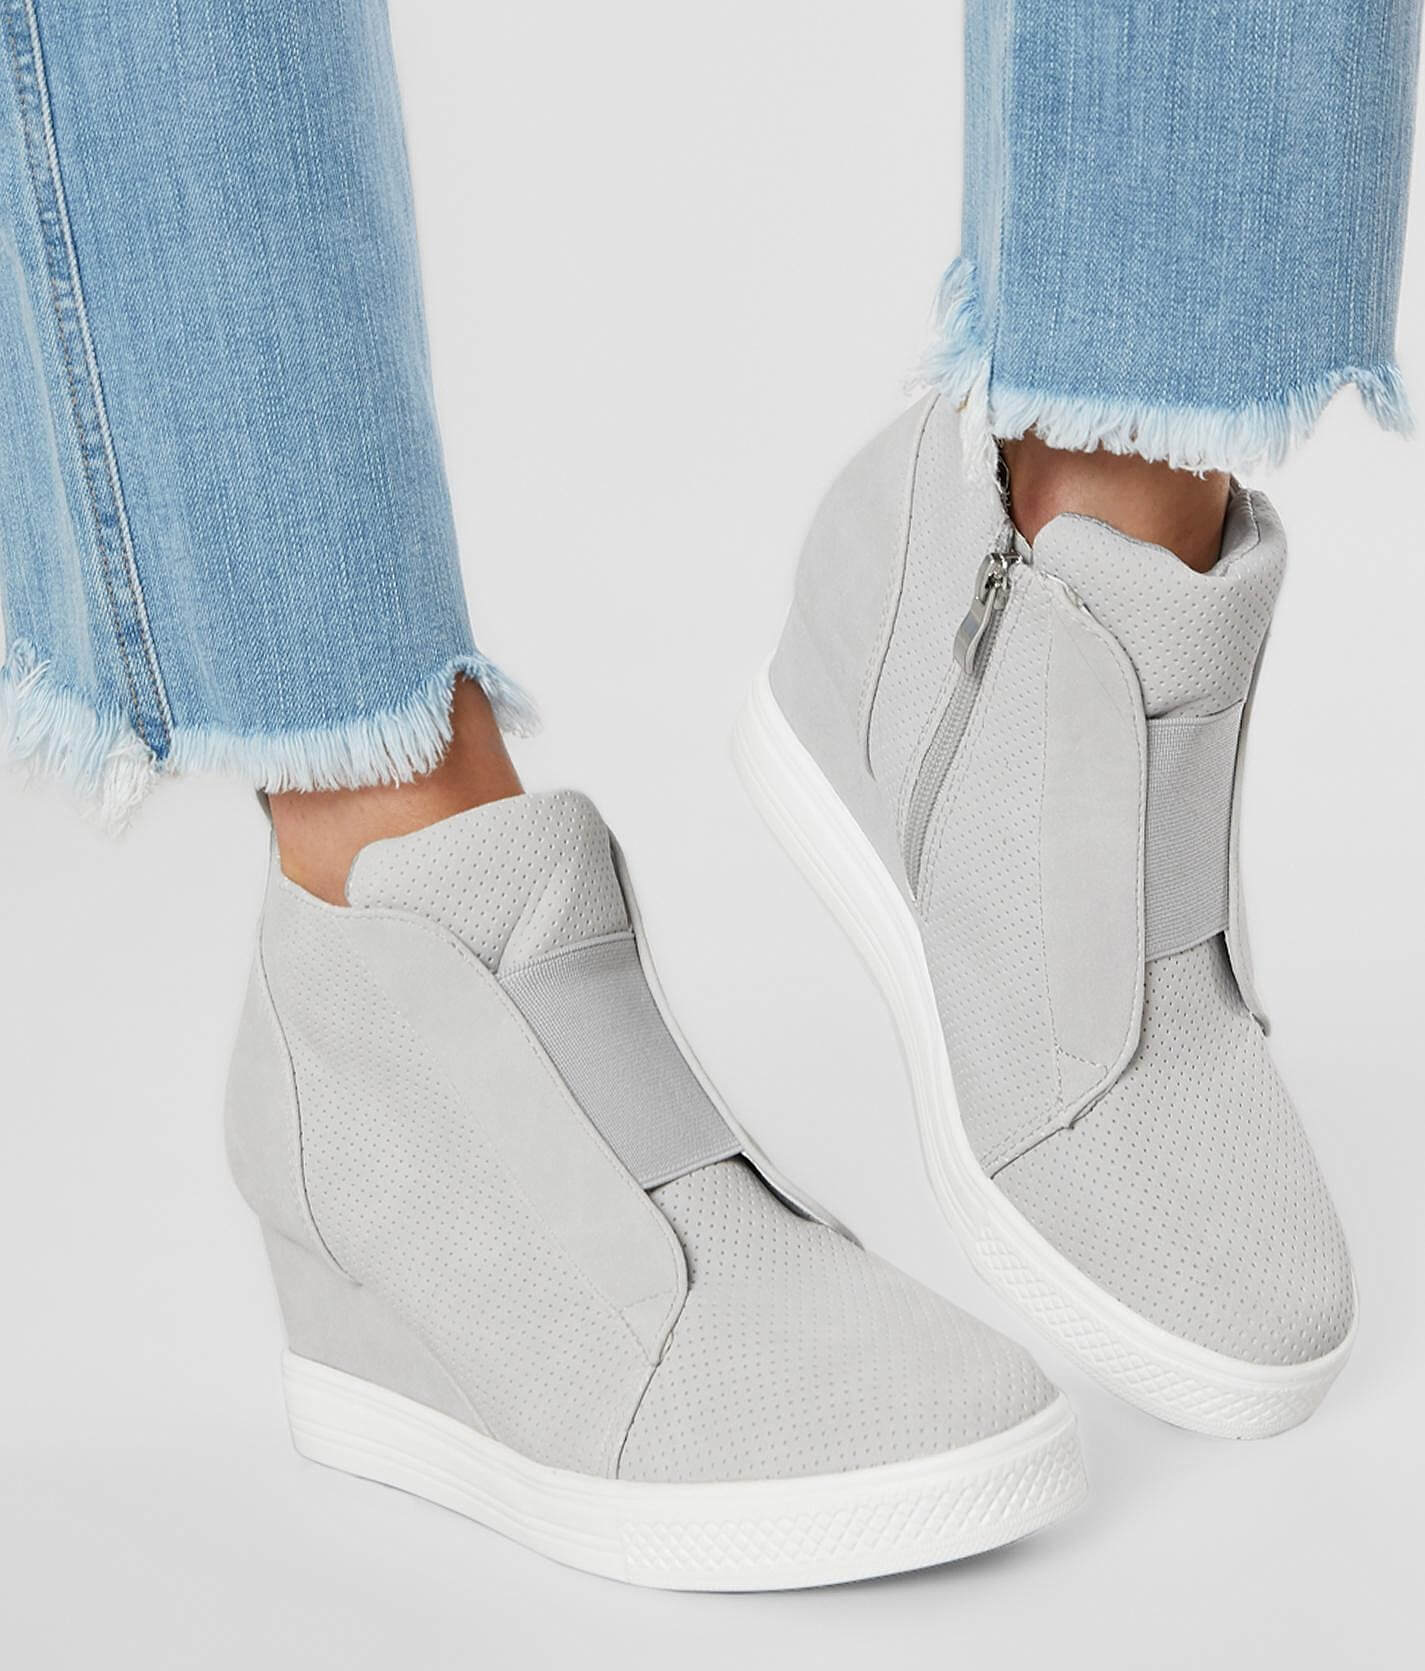 ccocci wedge sneakers